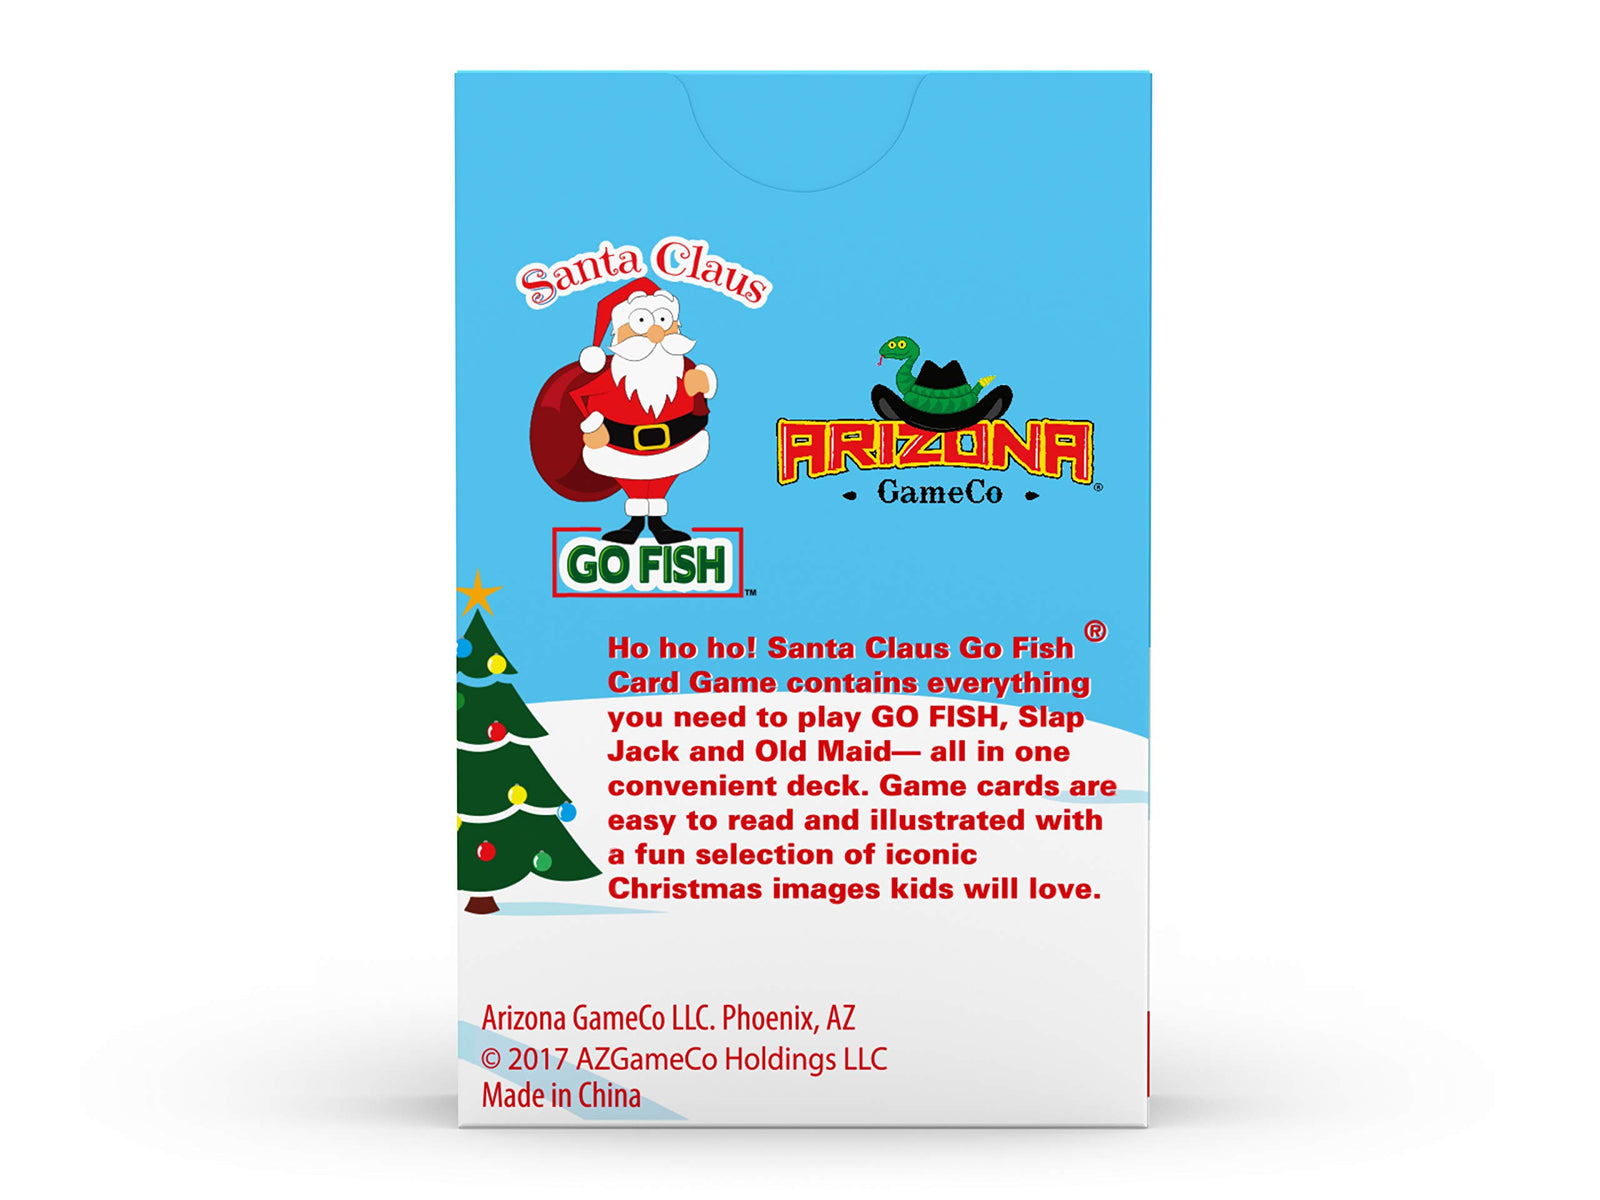 Santa Claus GO Fish, a Christmas Card Game for Kids (GO Fish, Old Maid, and Slap Jack), Play 3 Classic Kids Games Using ONE Holiday Themed Deck, Ideally Sized for Use as Stocking Stuffers